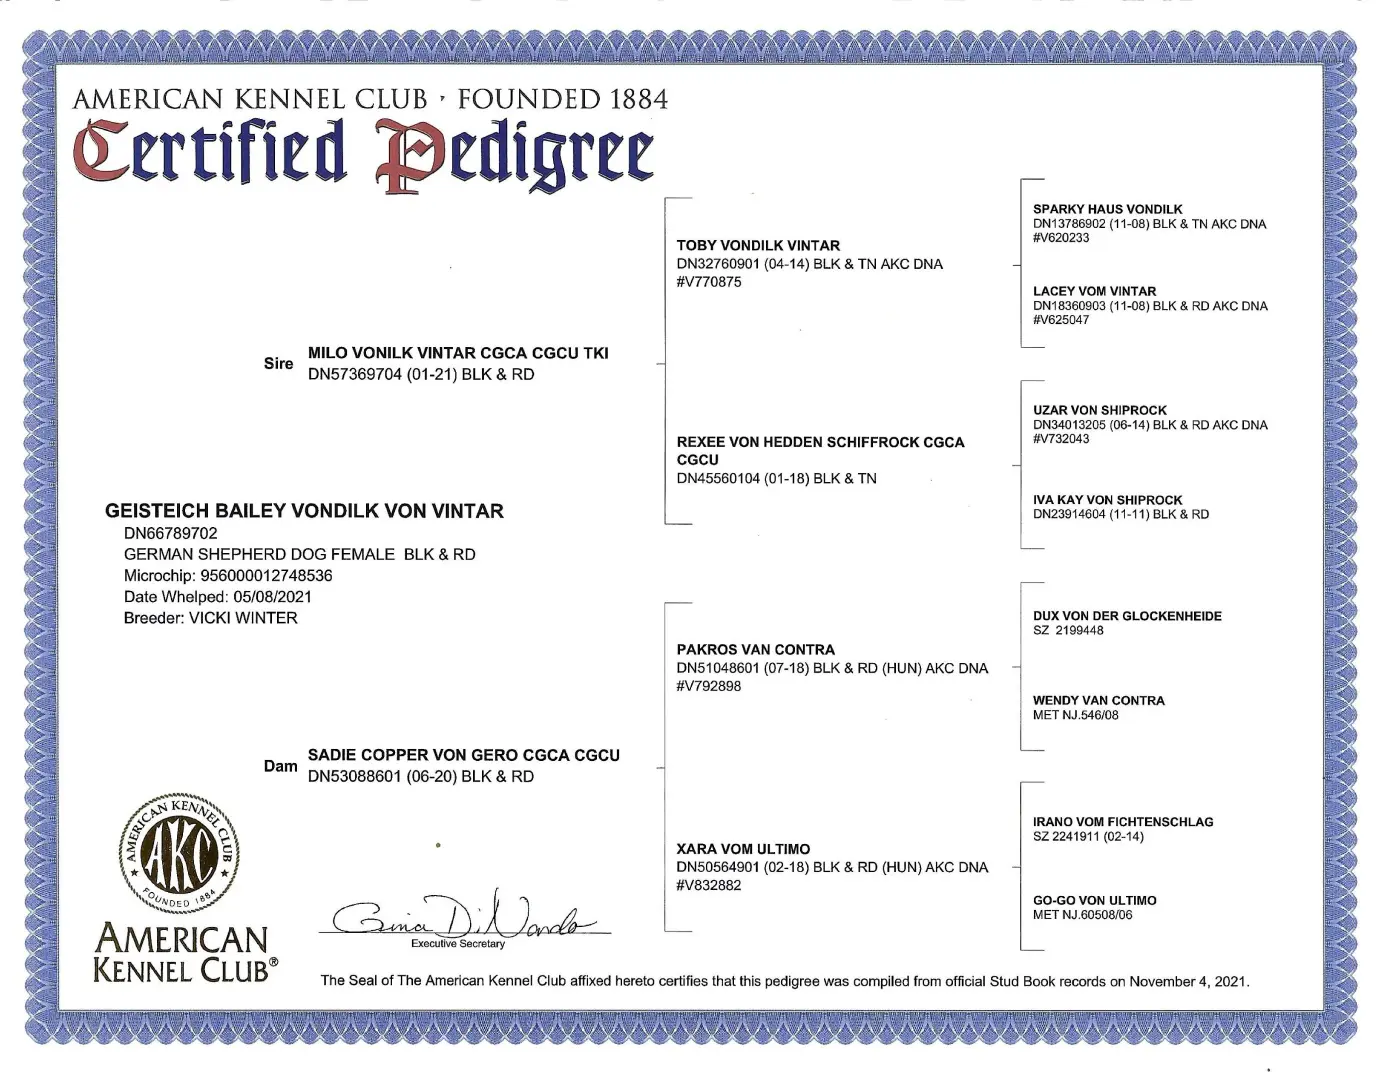 A certificate of authenticity for an american kennel club certified pedigree.